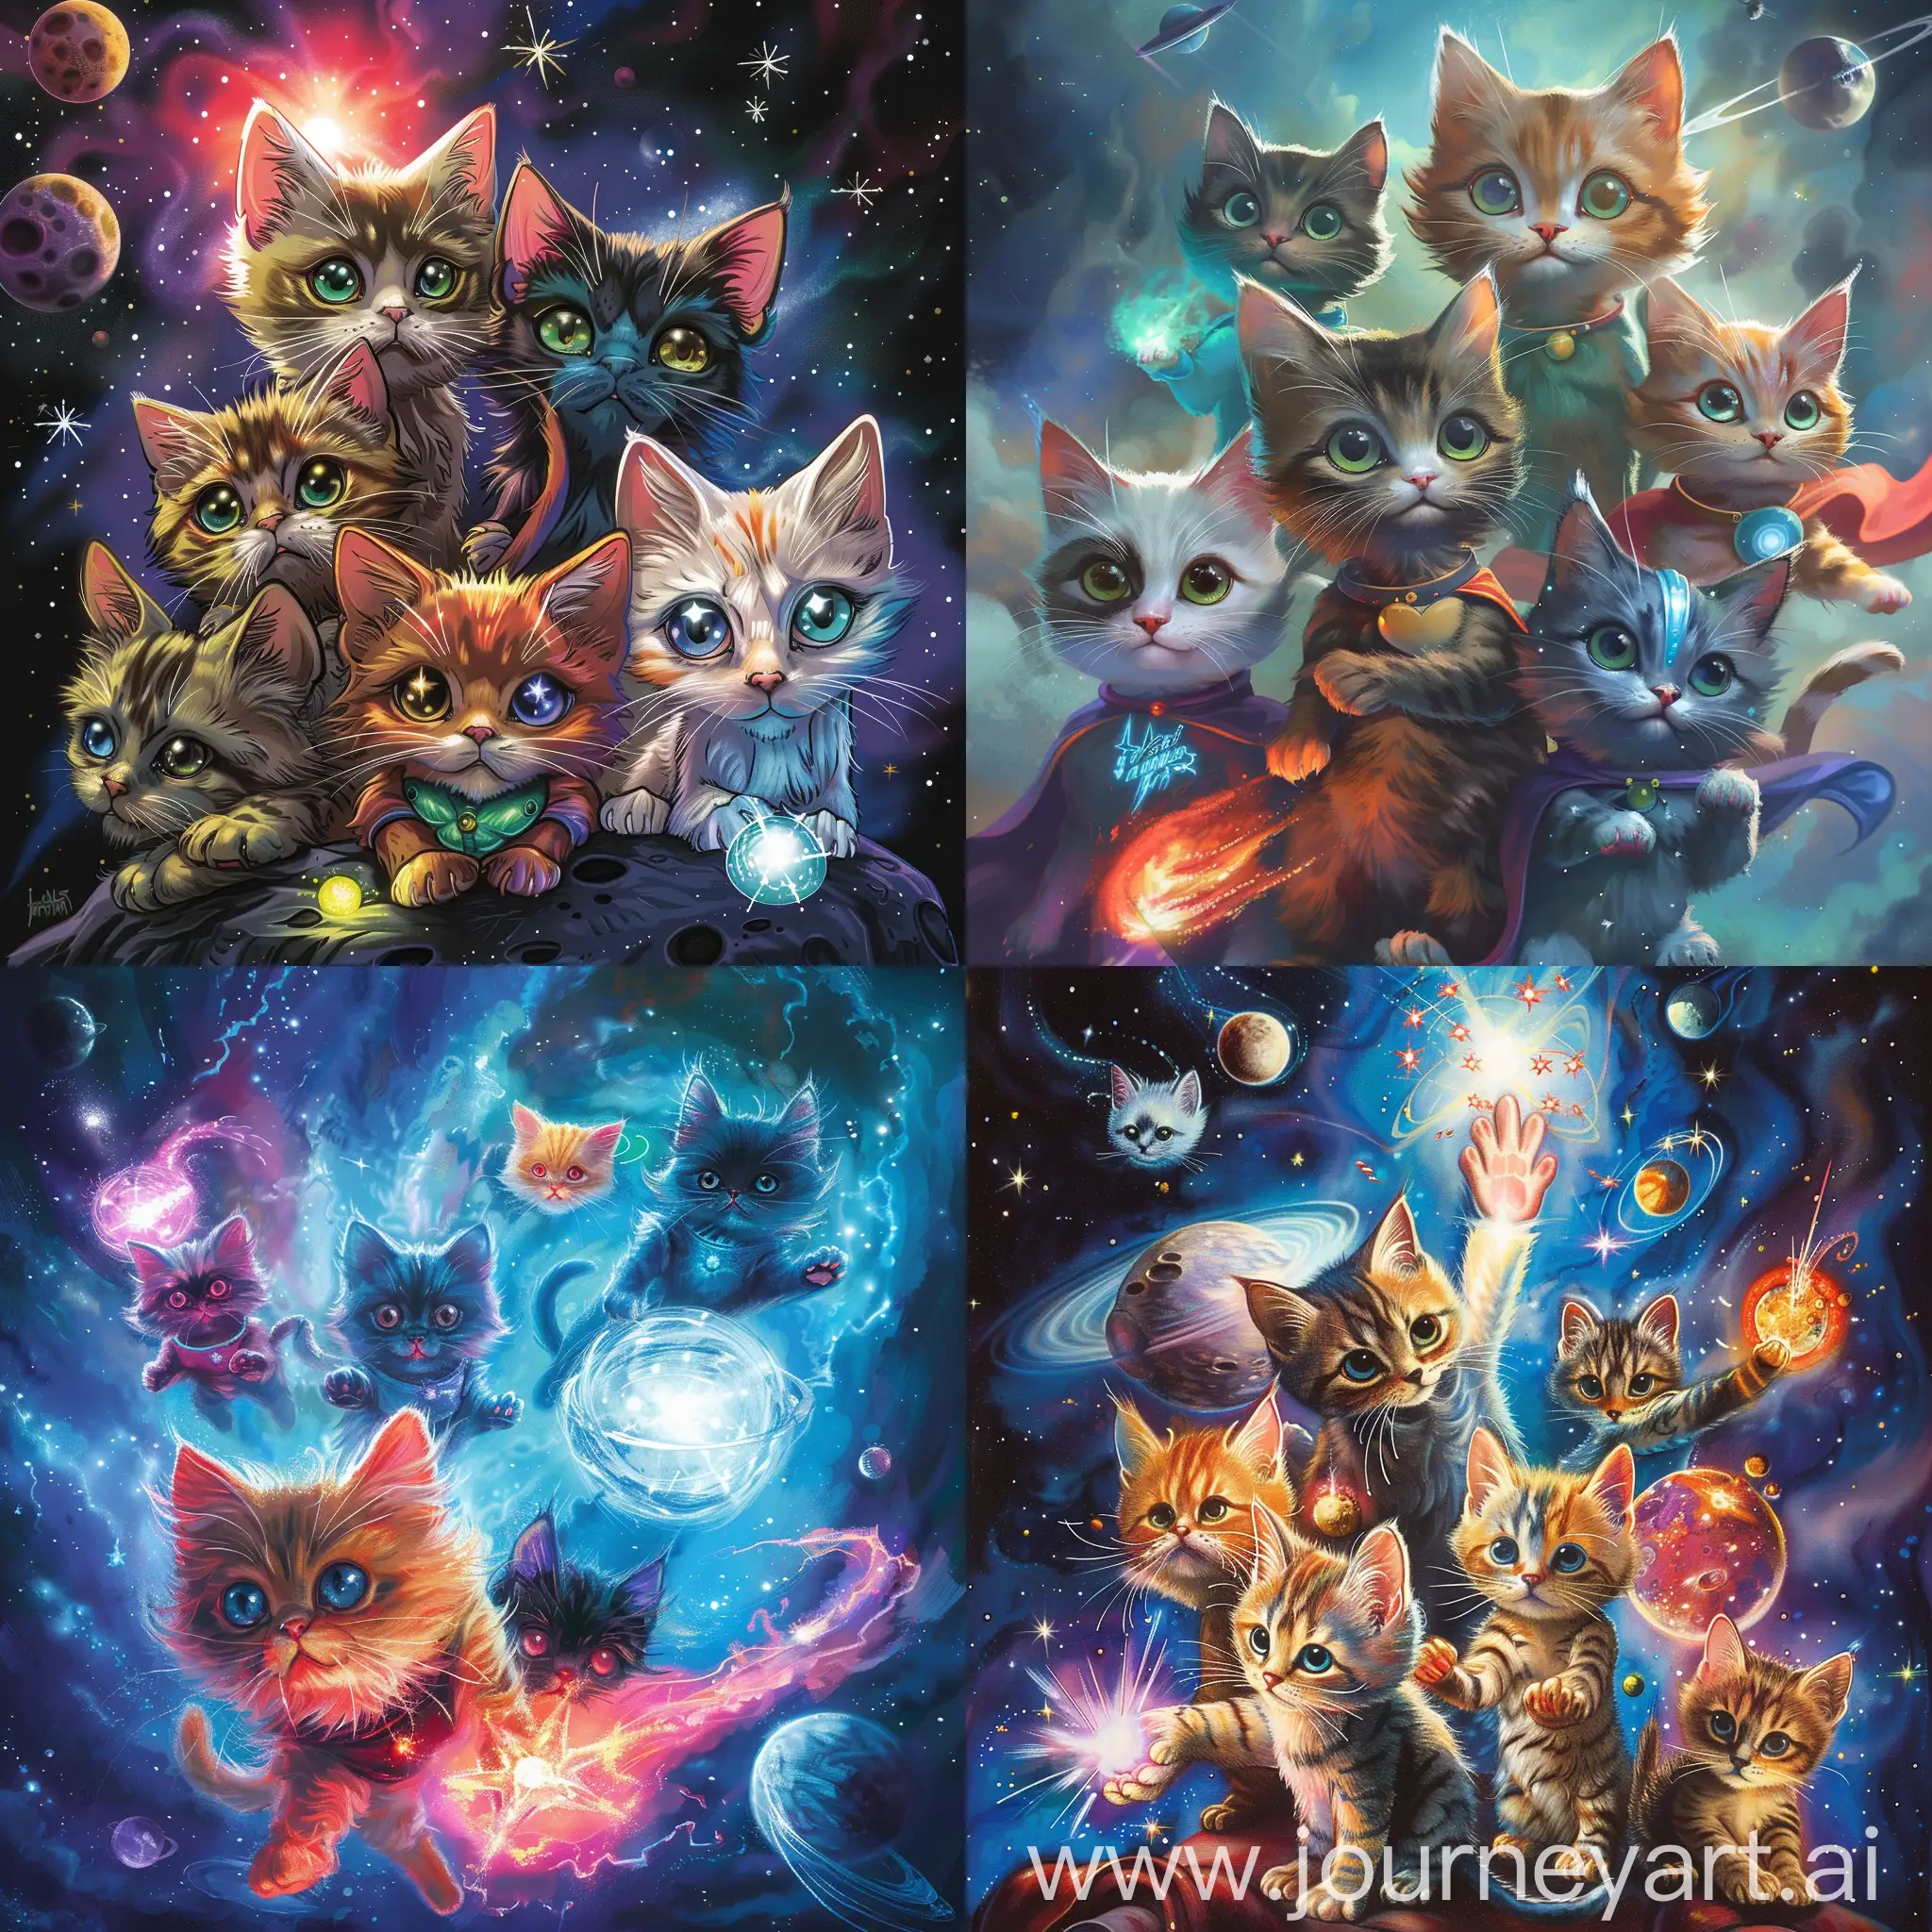 The cosmic kittens, a motley group of super hero kittens, each with unique magic space powers